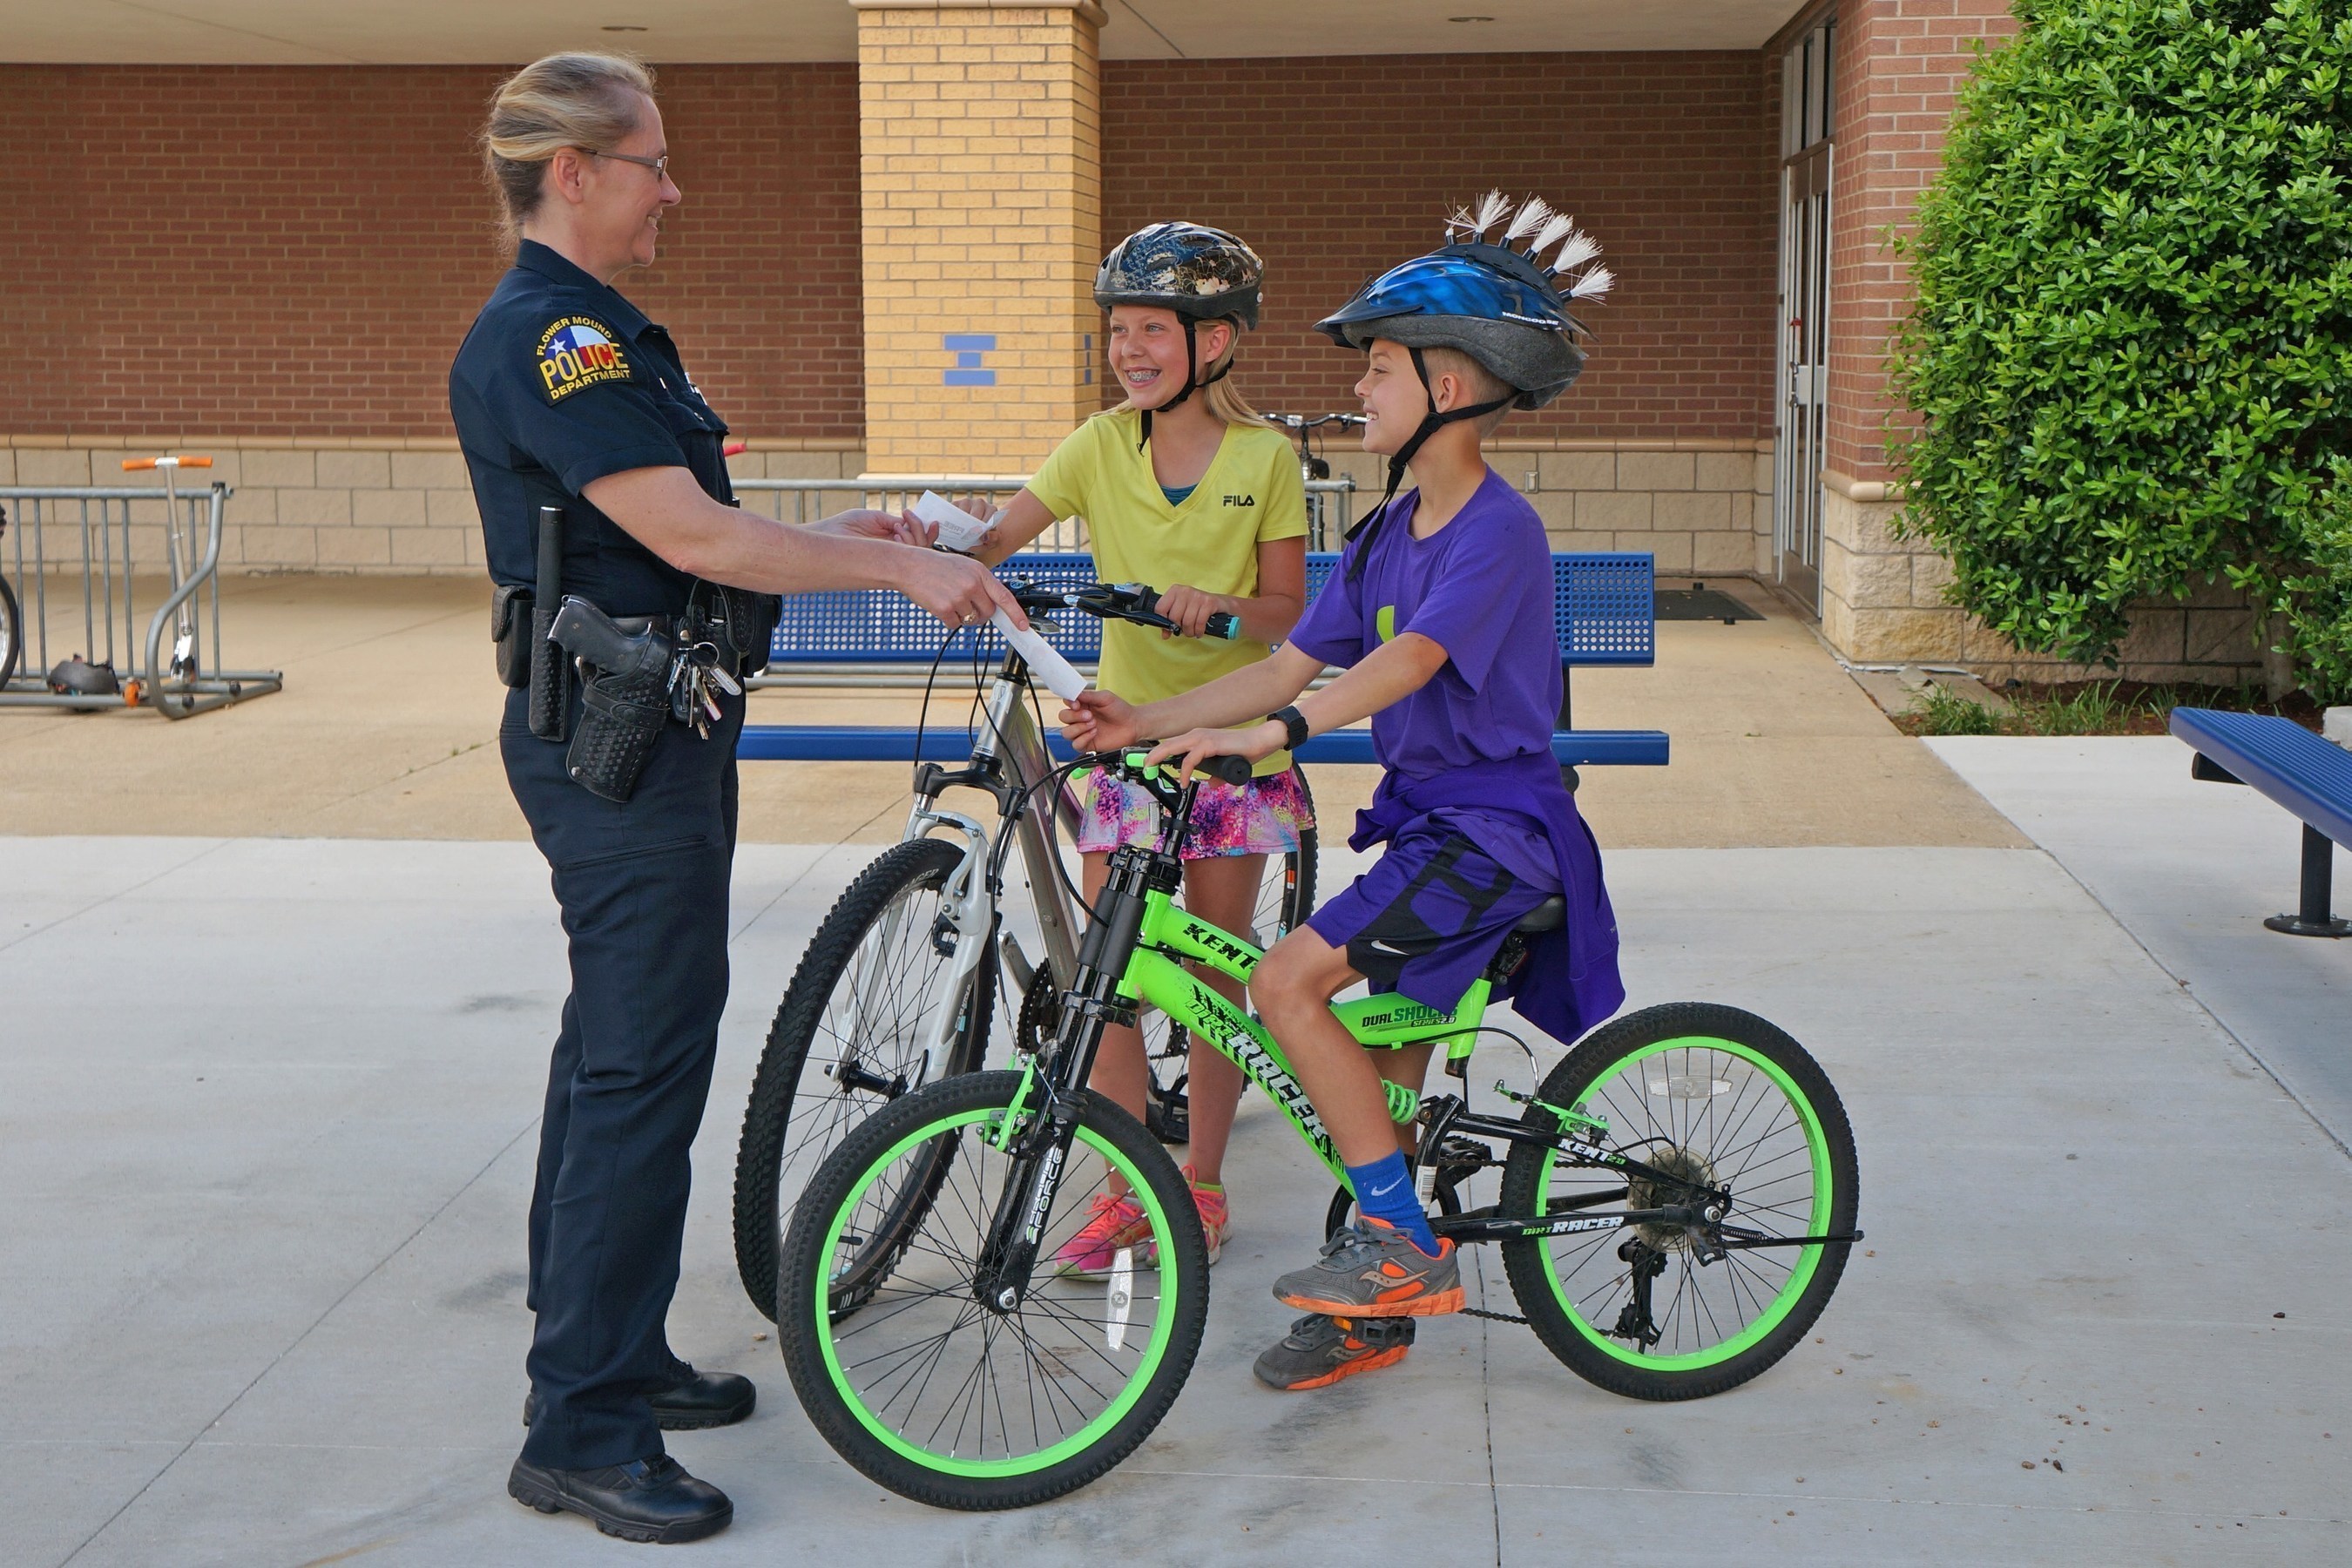 A police officer "tickets" kids with a 7-Eleven Operation Chill coupon for being safe by wearing helmets while riding their bikes.